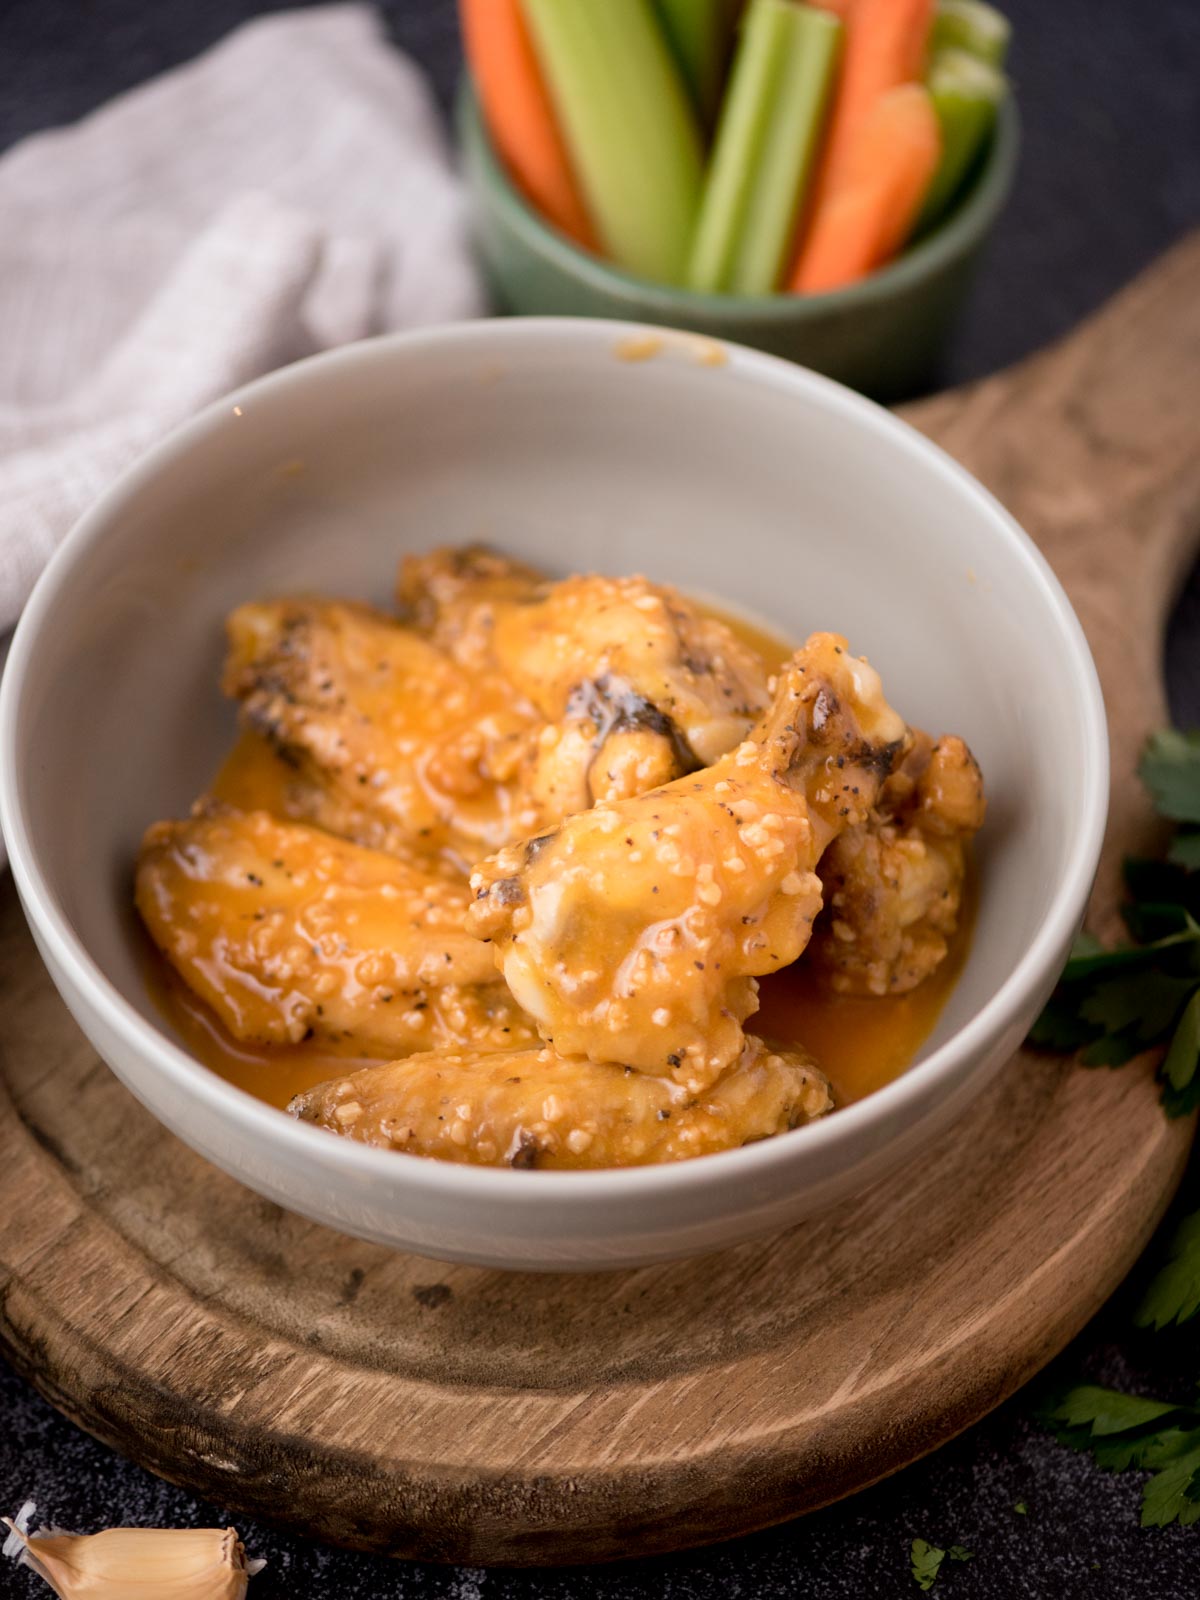 garlic butter chicken wings in a bowl covered in sauce with a small bowl of carrots and celery nearby